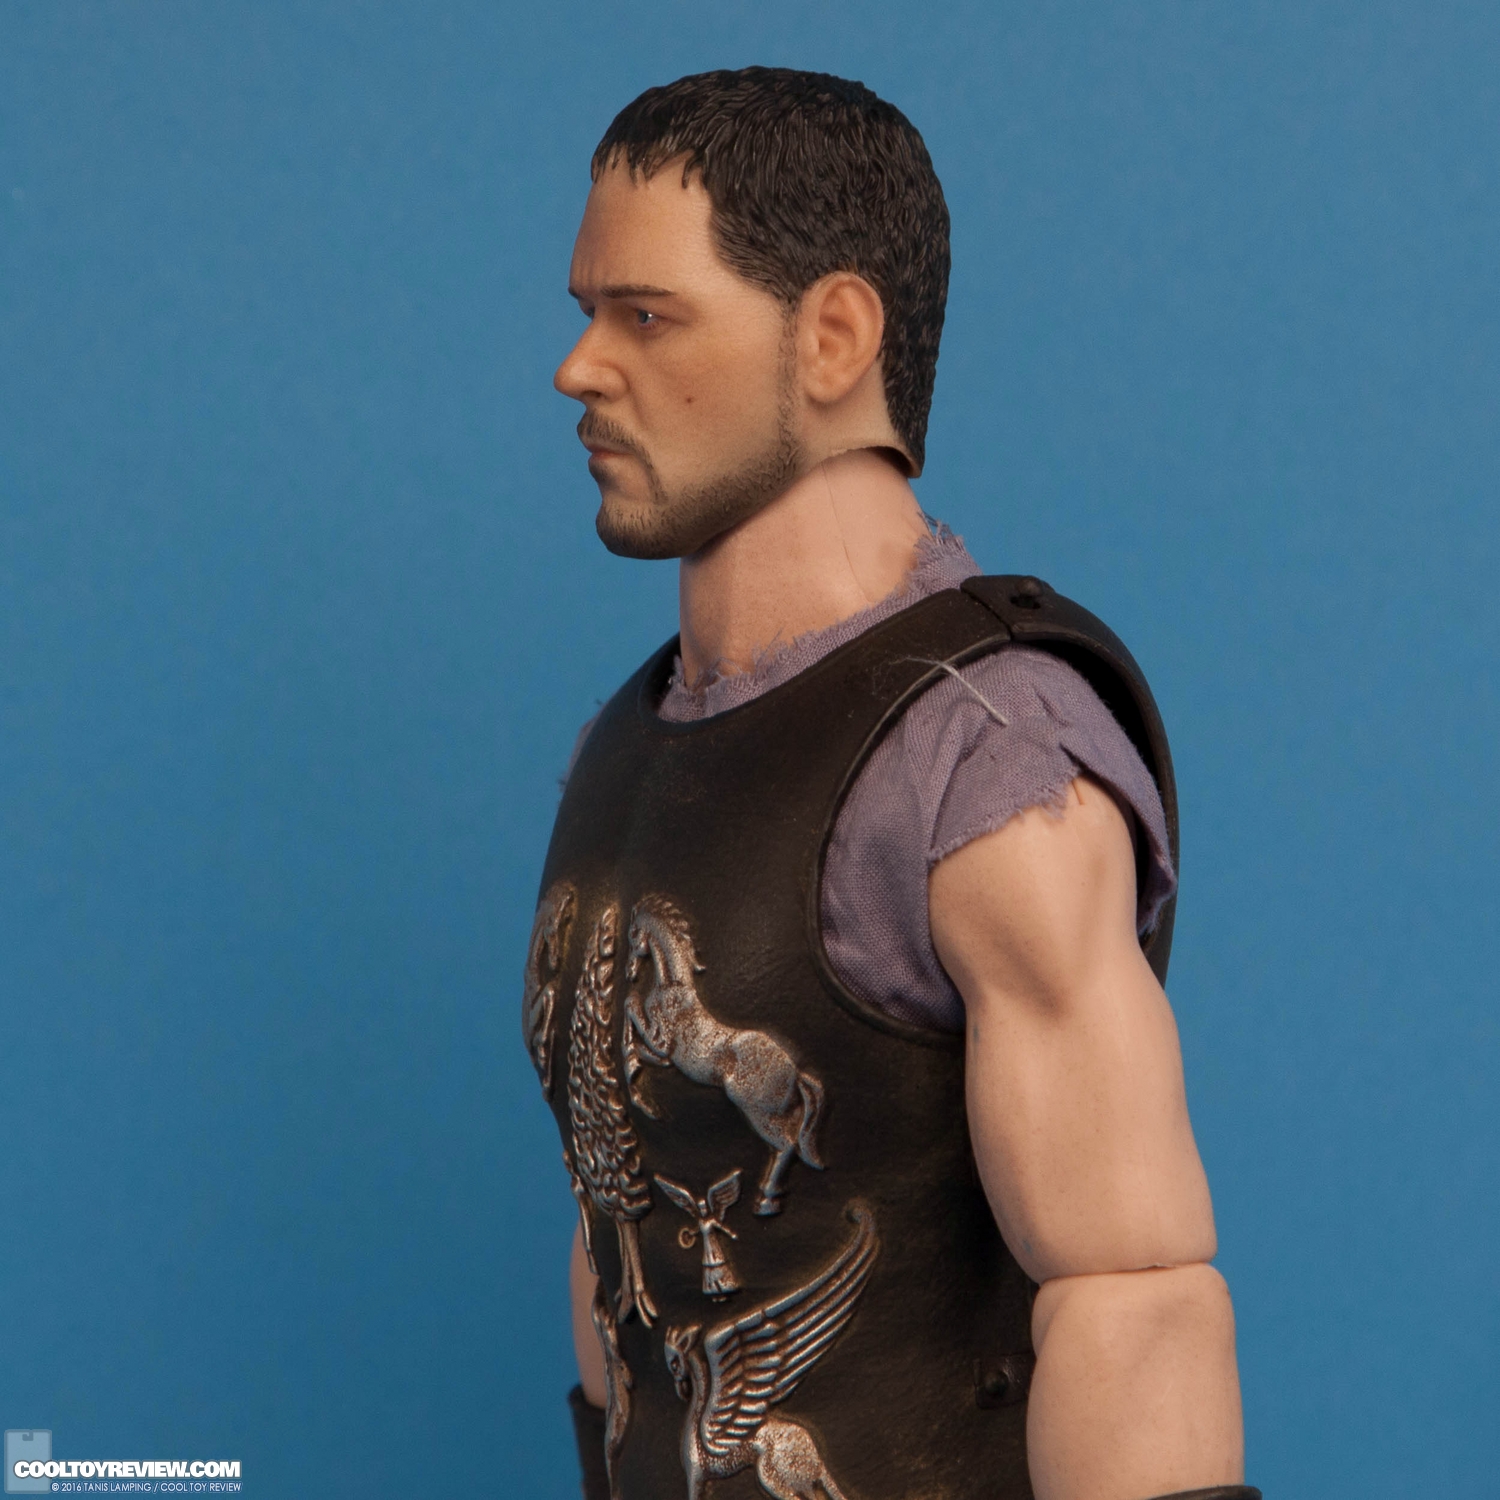 pangaea-toy-gladiator-general-sixth-scale-collectible-figure-023.jpg